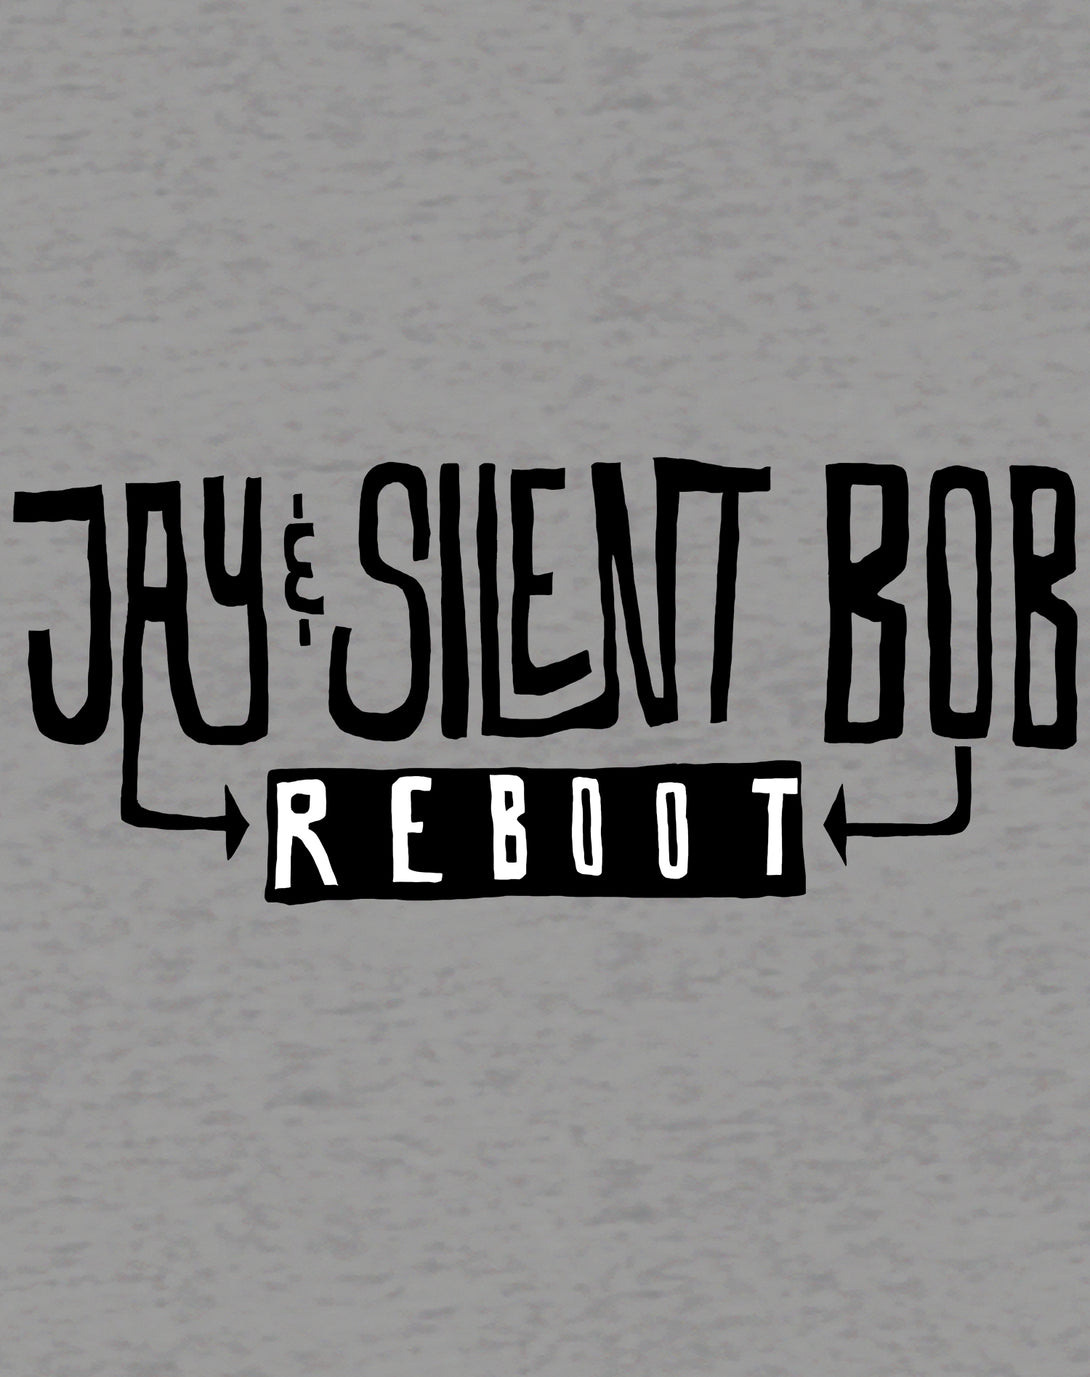 Kevin Smith Jay & Silent Bob Reboot Movie Logo Official Women's T-Shirt Sports Grey - Urban Species Design Close Up